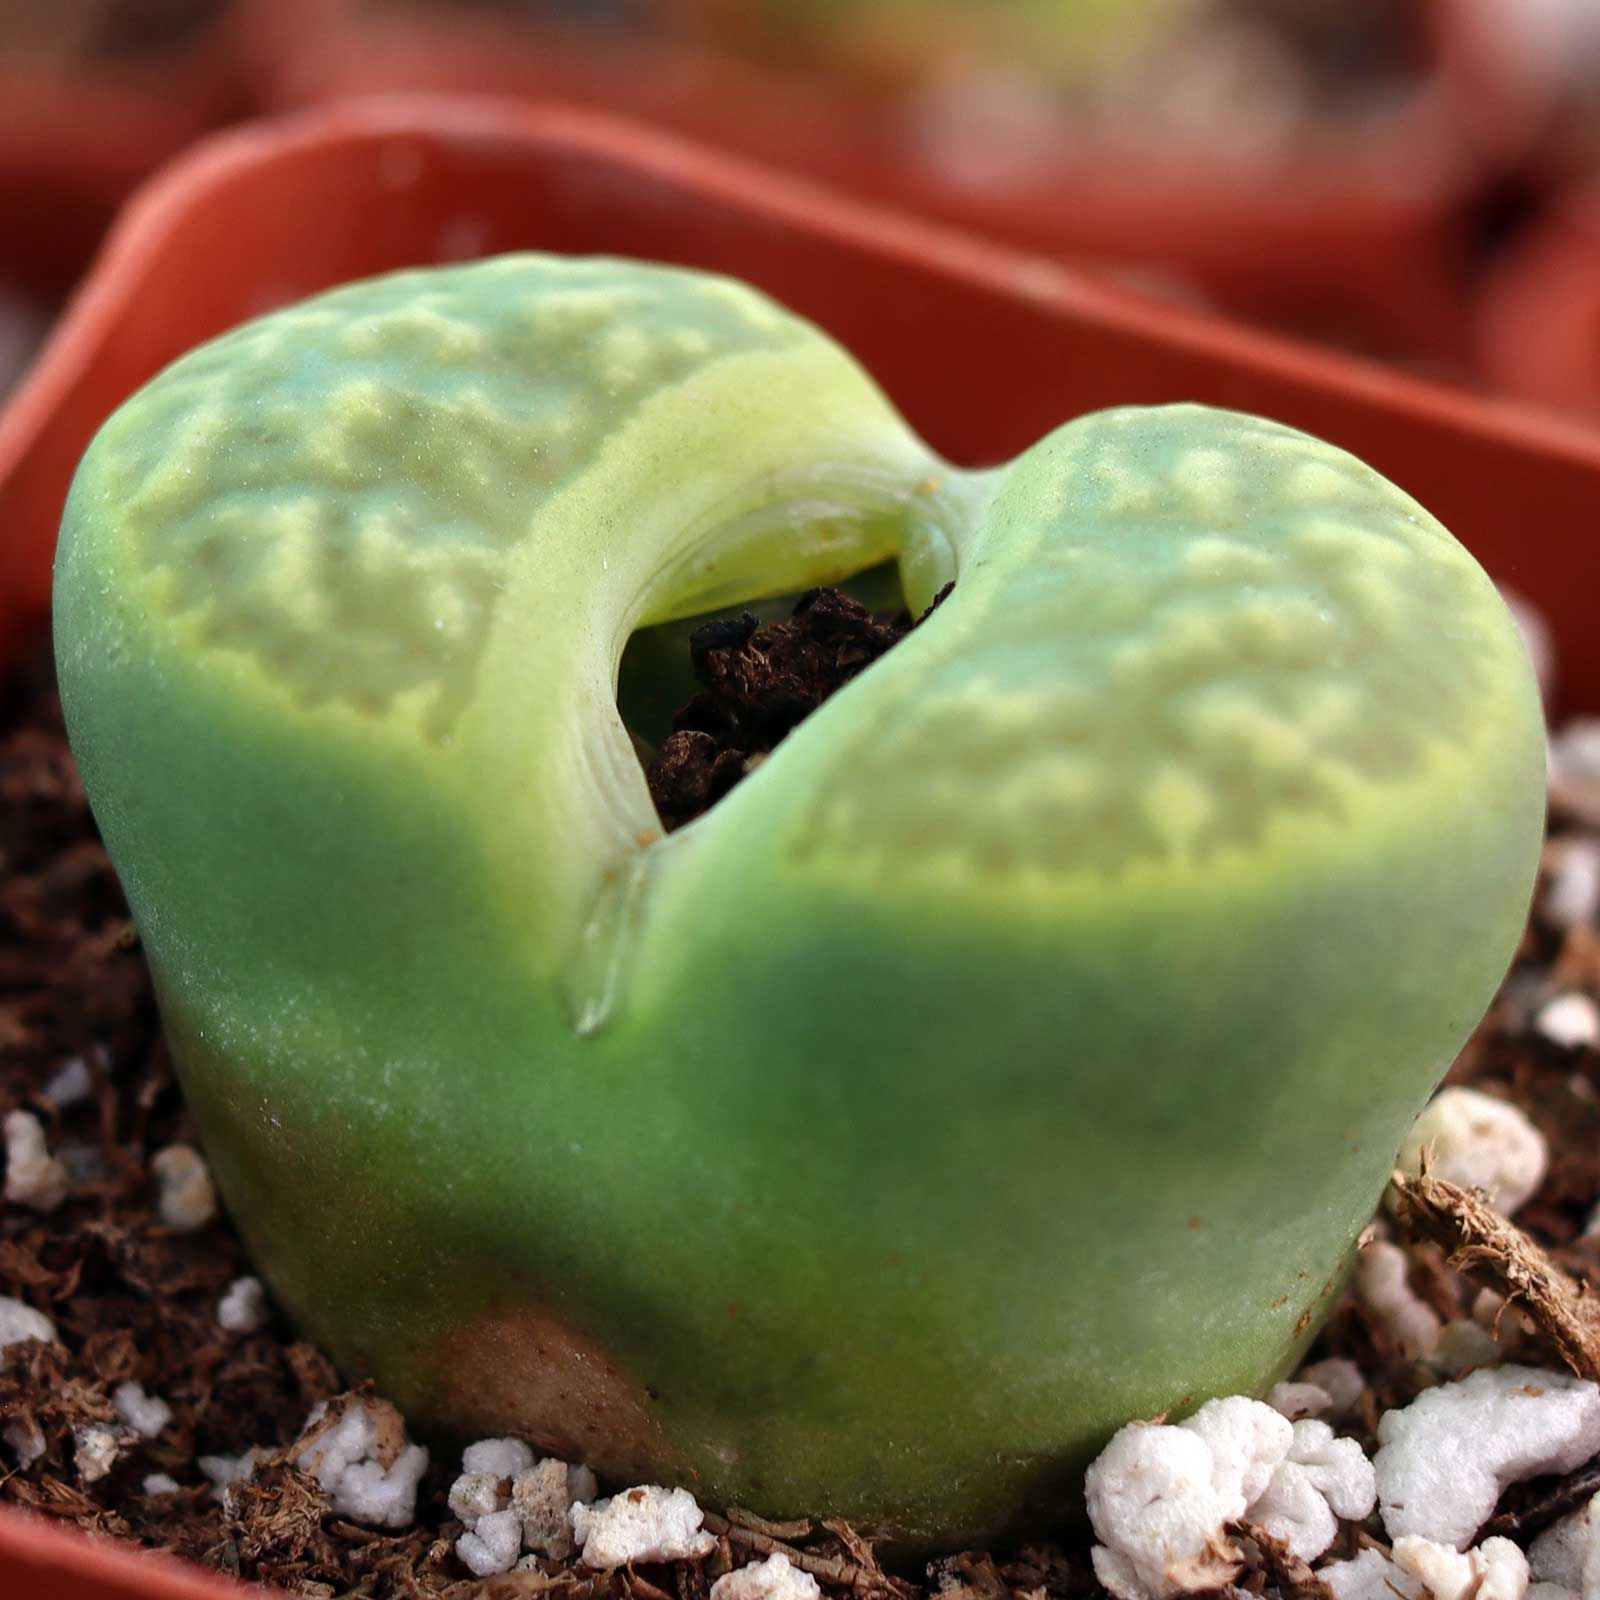 What does lithops "dry blooms" mean?